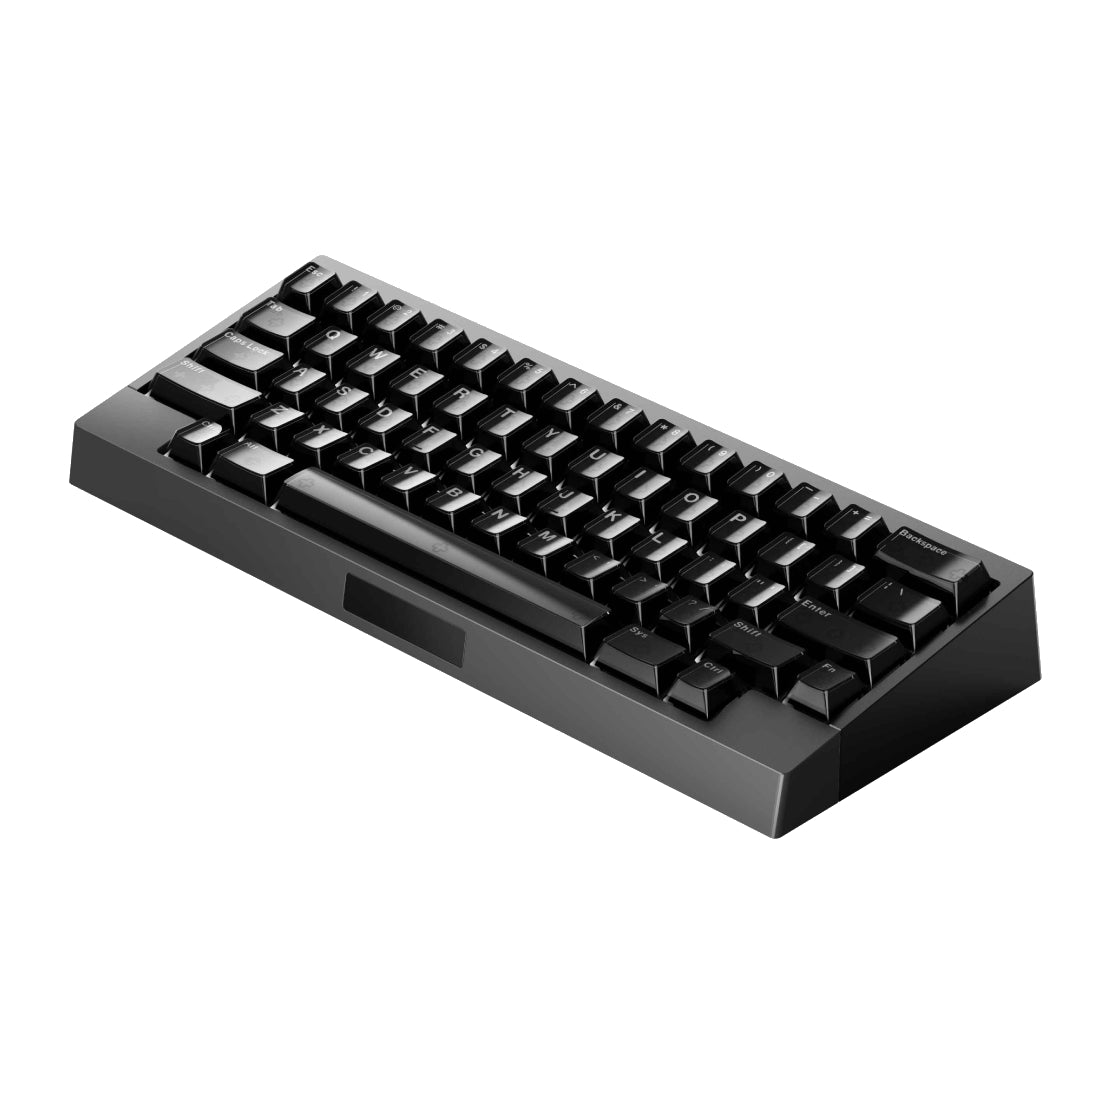 AngryMiao AM Compact Touch Wireless Keyboard - All Black - لوحة مفاتيح - Store 974 | ستور ٩٧٤